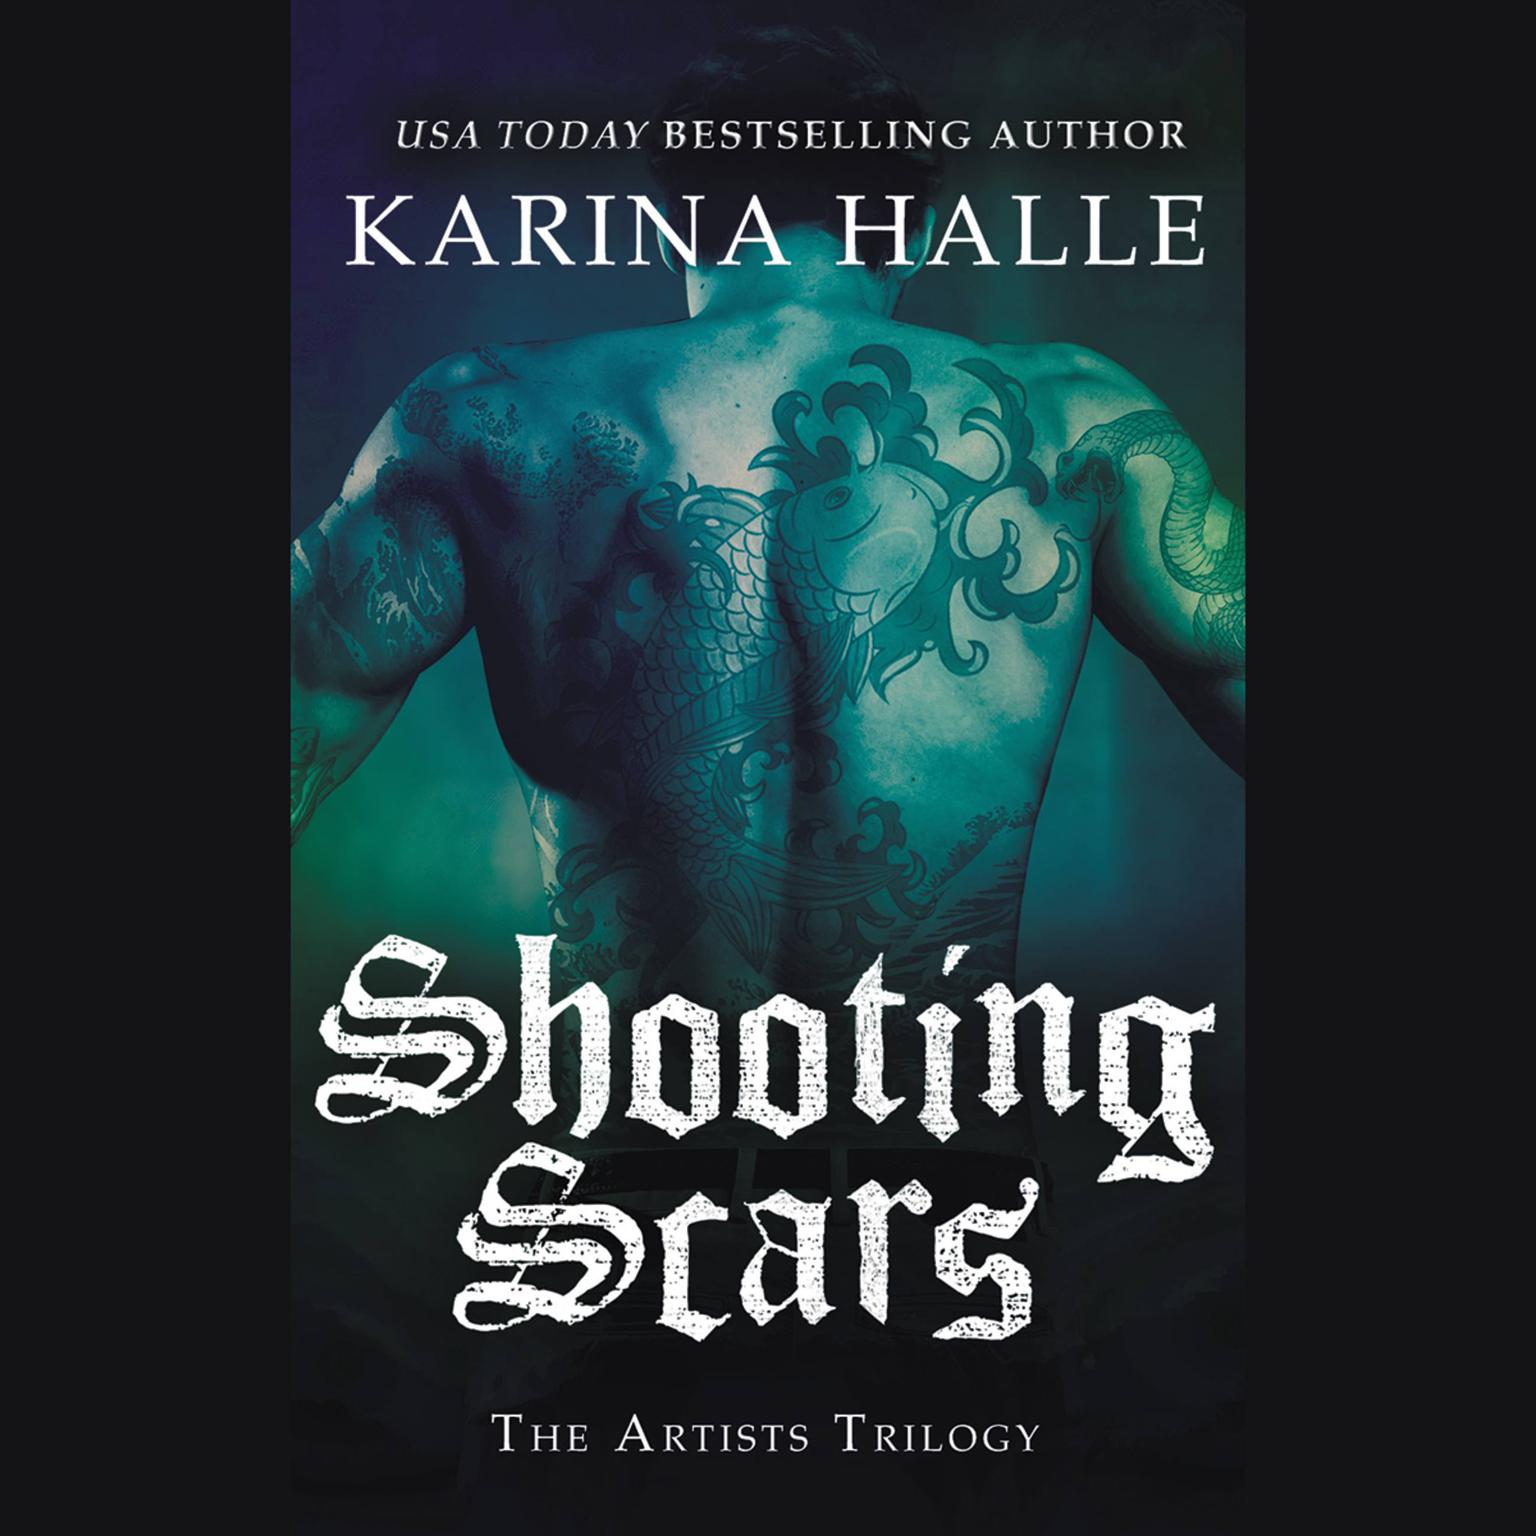 Shooting Scars: Book 2 in The Artists Trilogy Audiobook, by Karina Halle